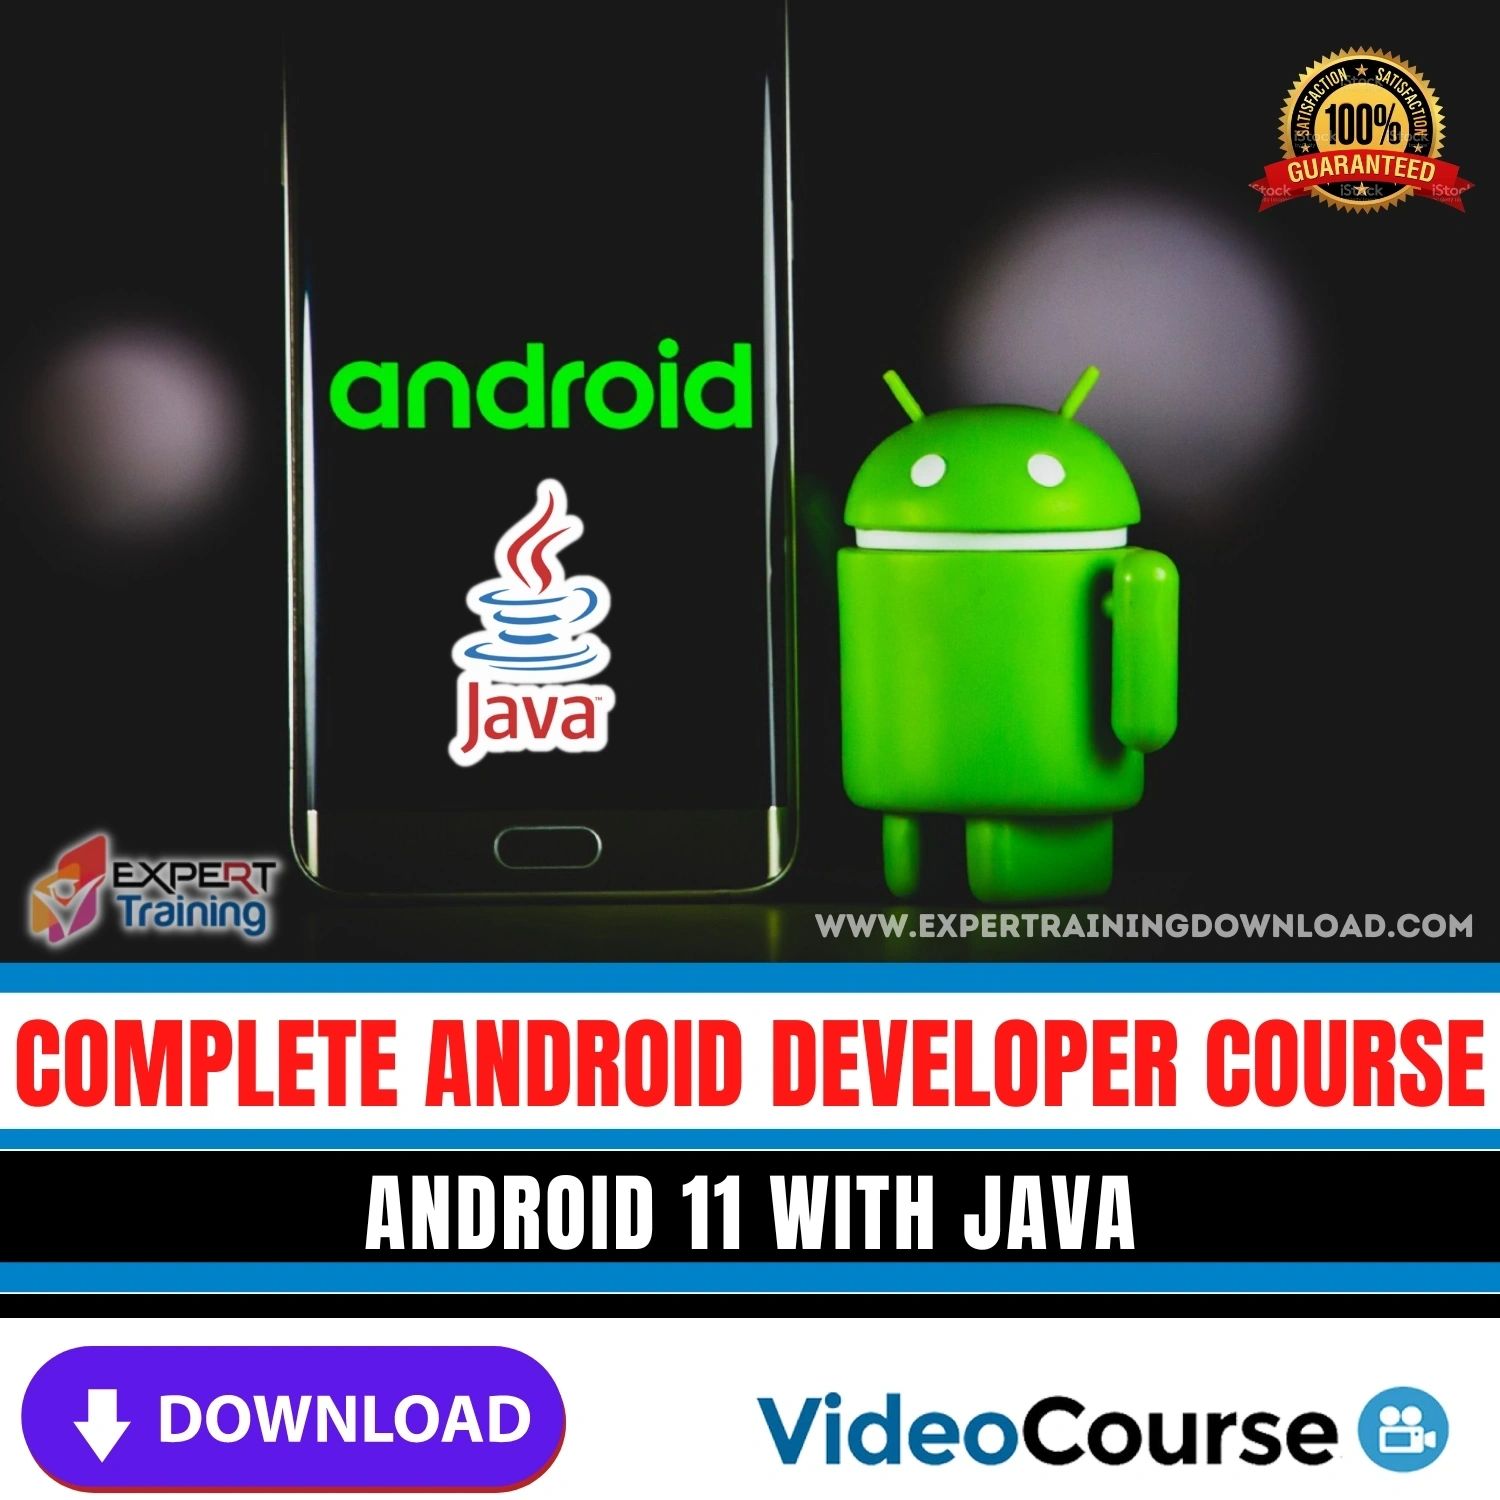 Complete Android Developer Course Android 11 with Java